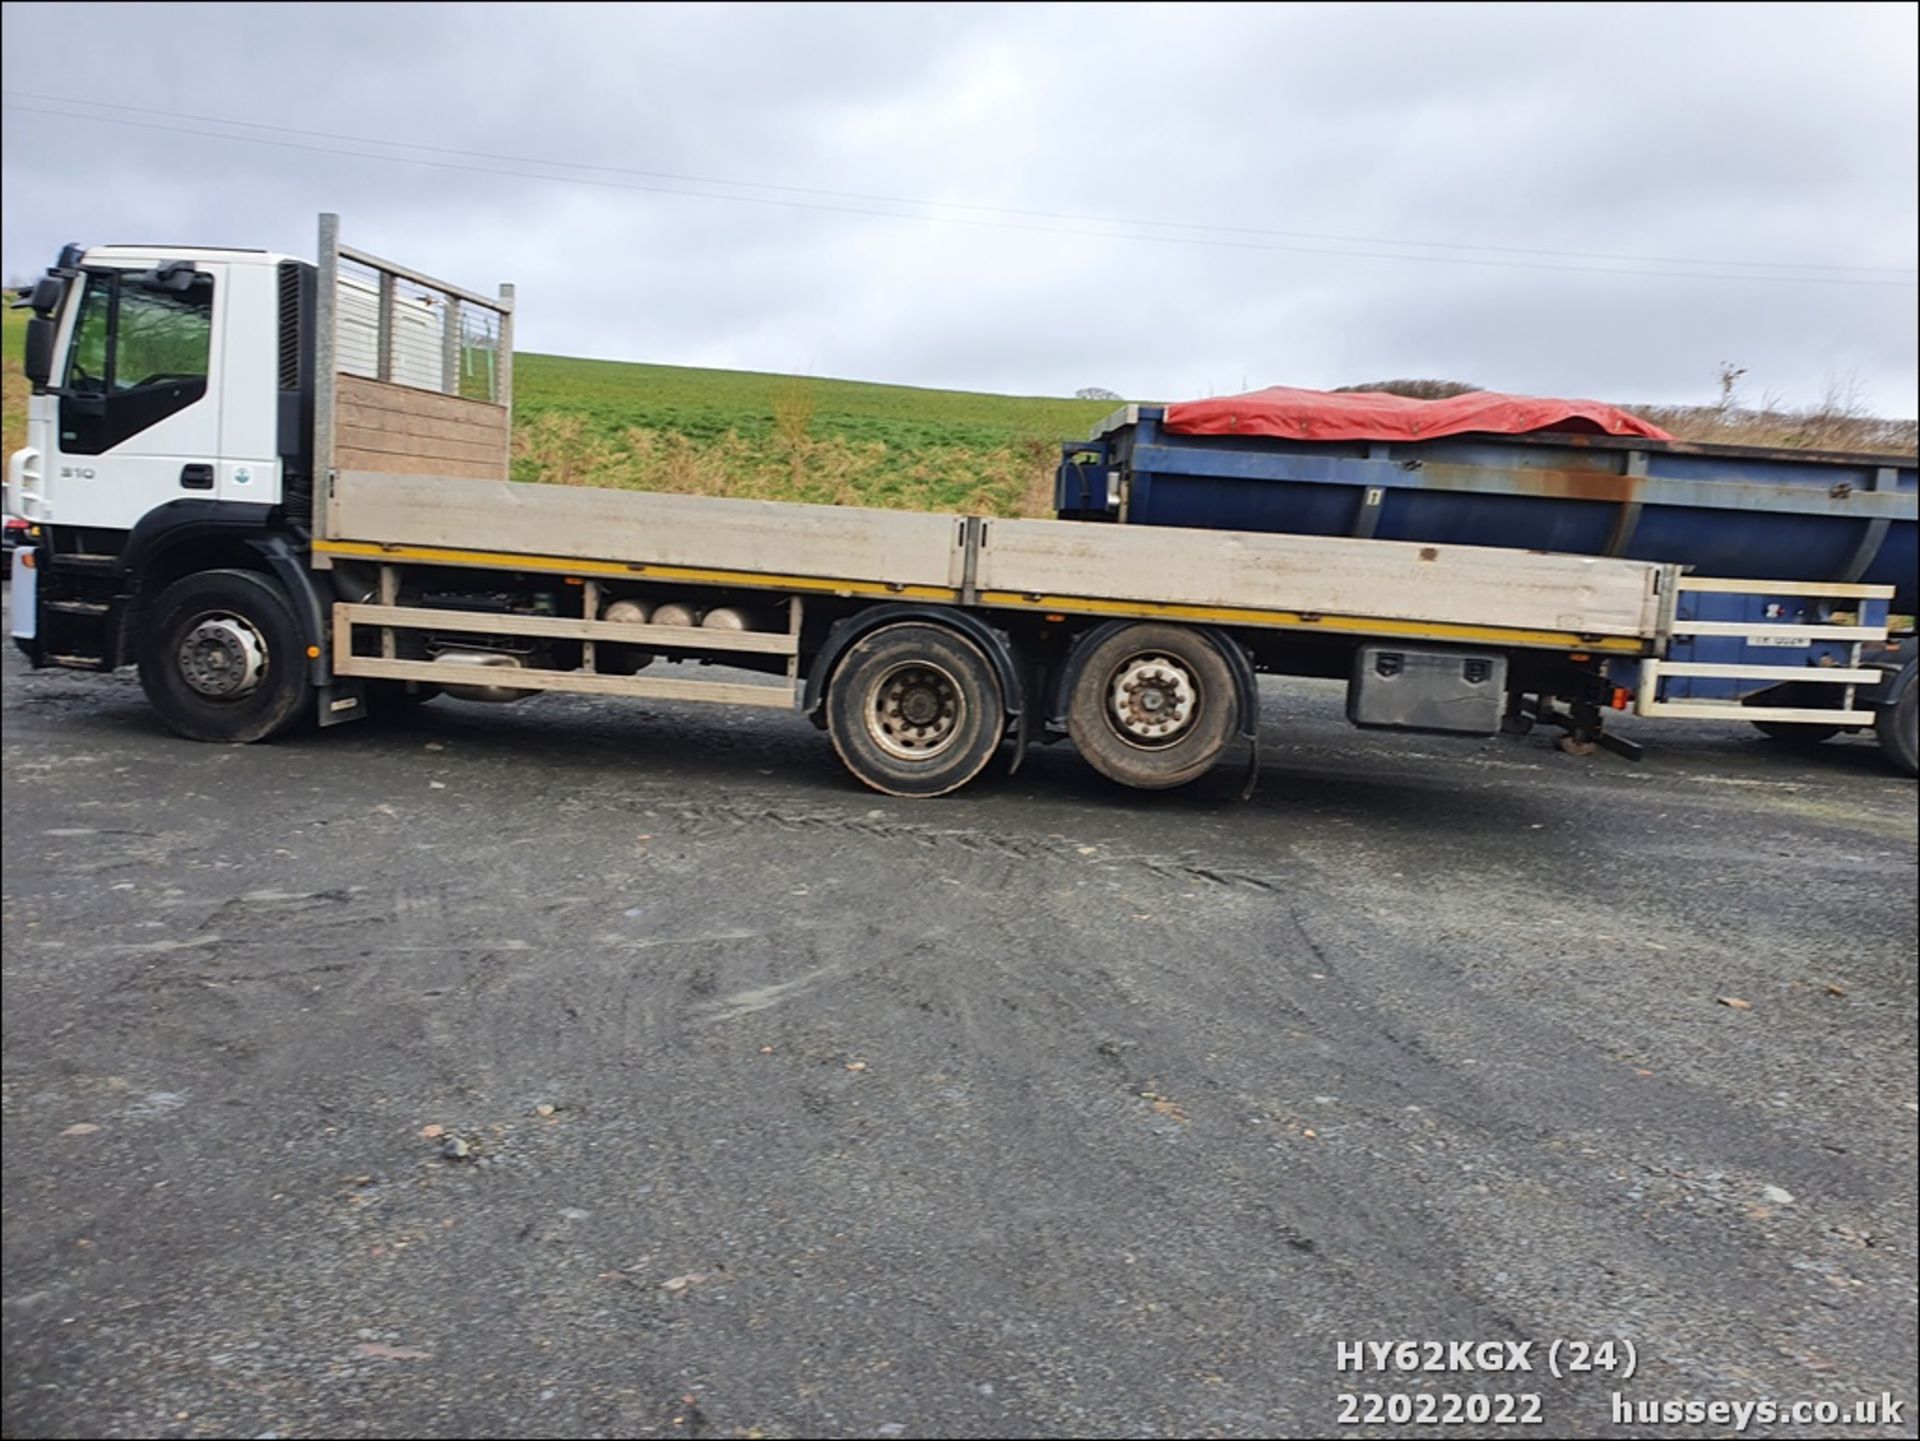 12/62 IVECO STRALIS - 7790cc 2dr Flat Bed (White) - Image 6 of 28